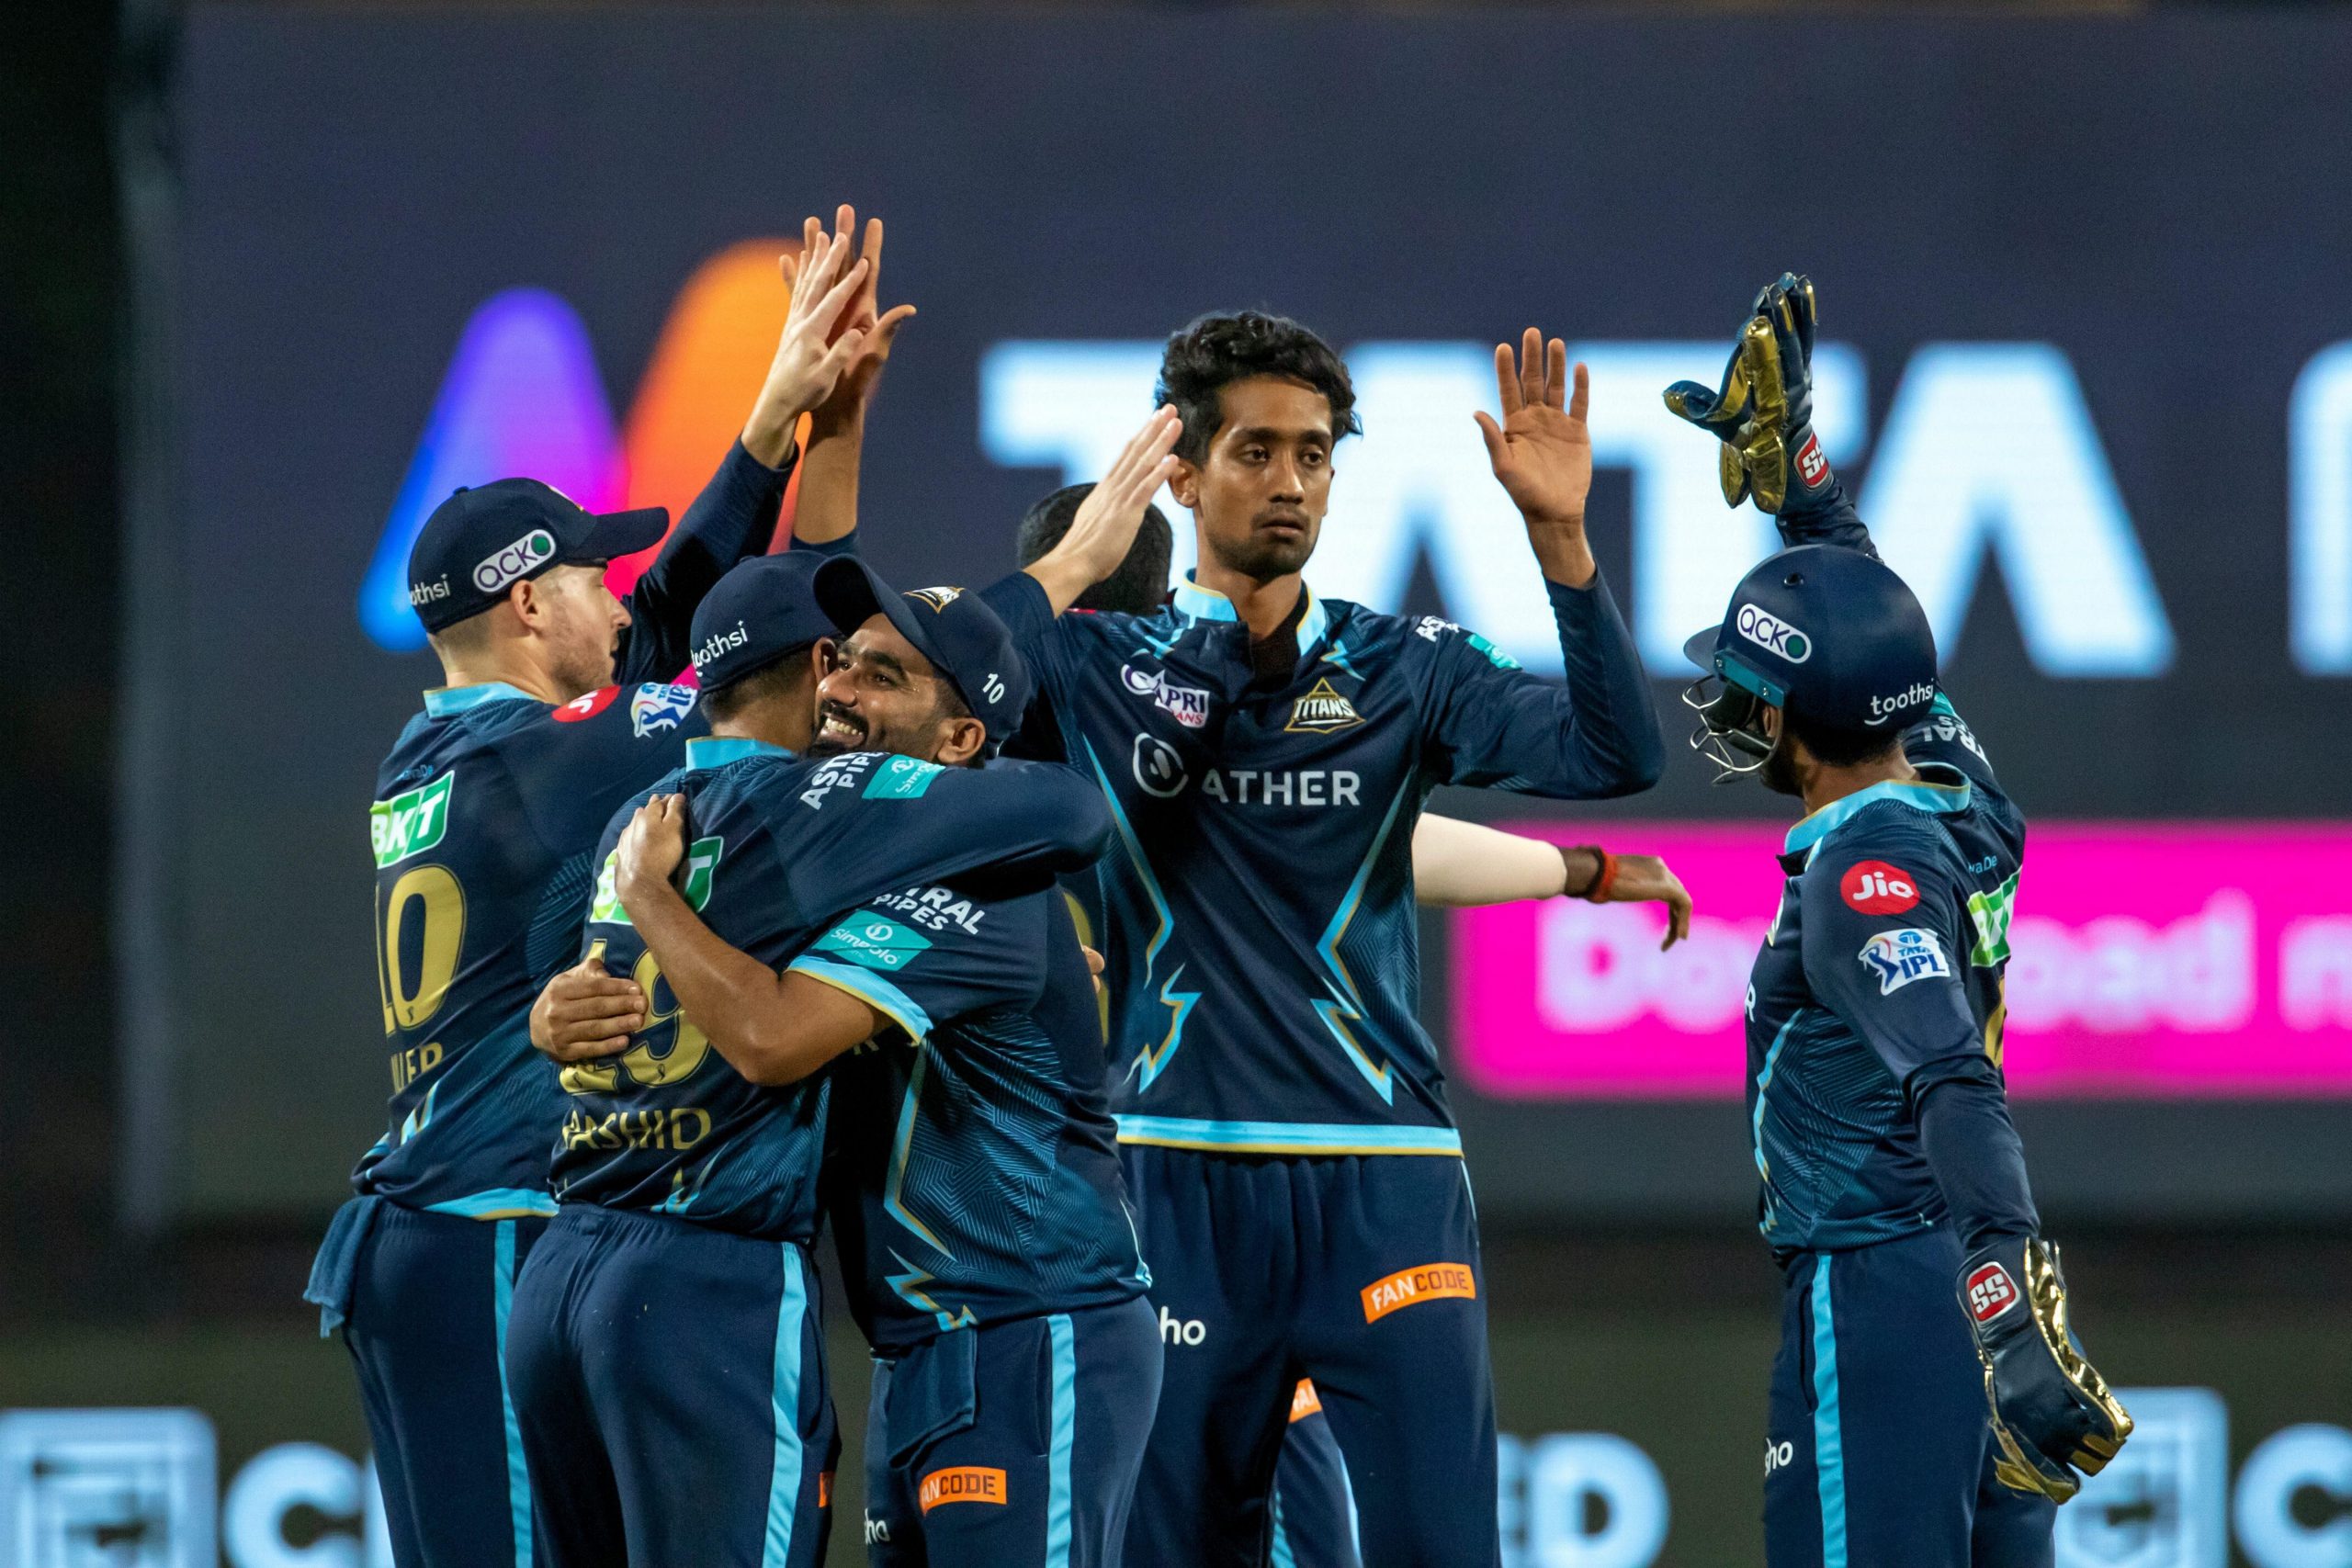 IPL 2022: All-round Gujarat Titans beat Chennai Super Kings by 7 wickets